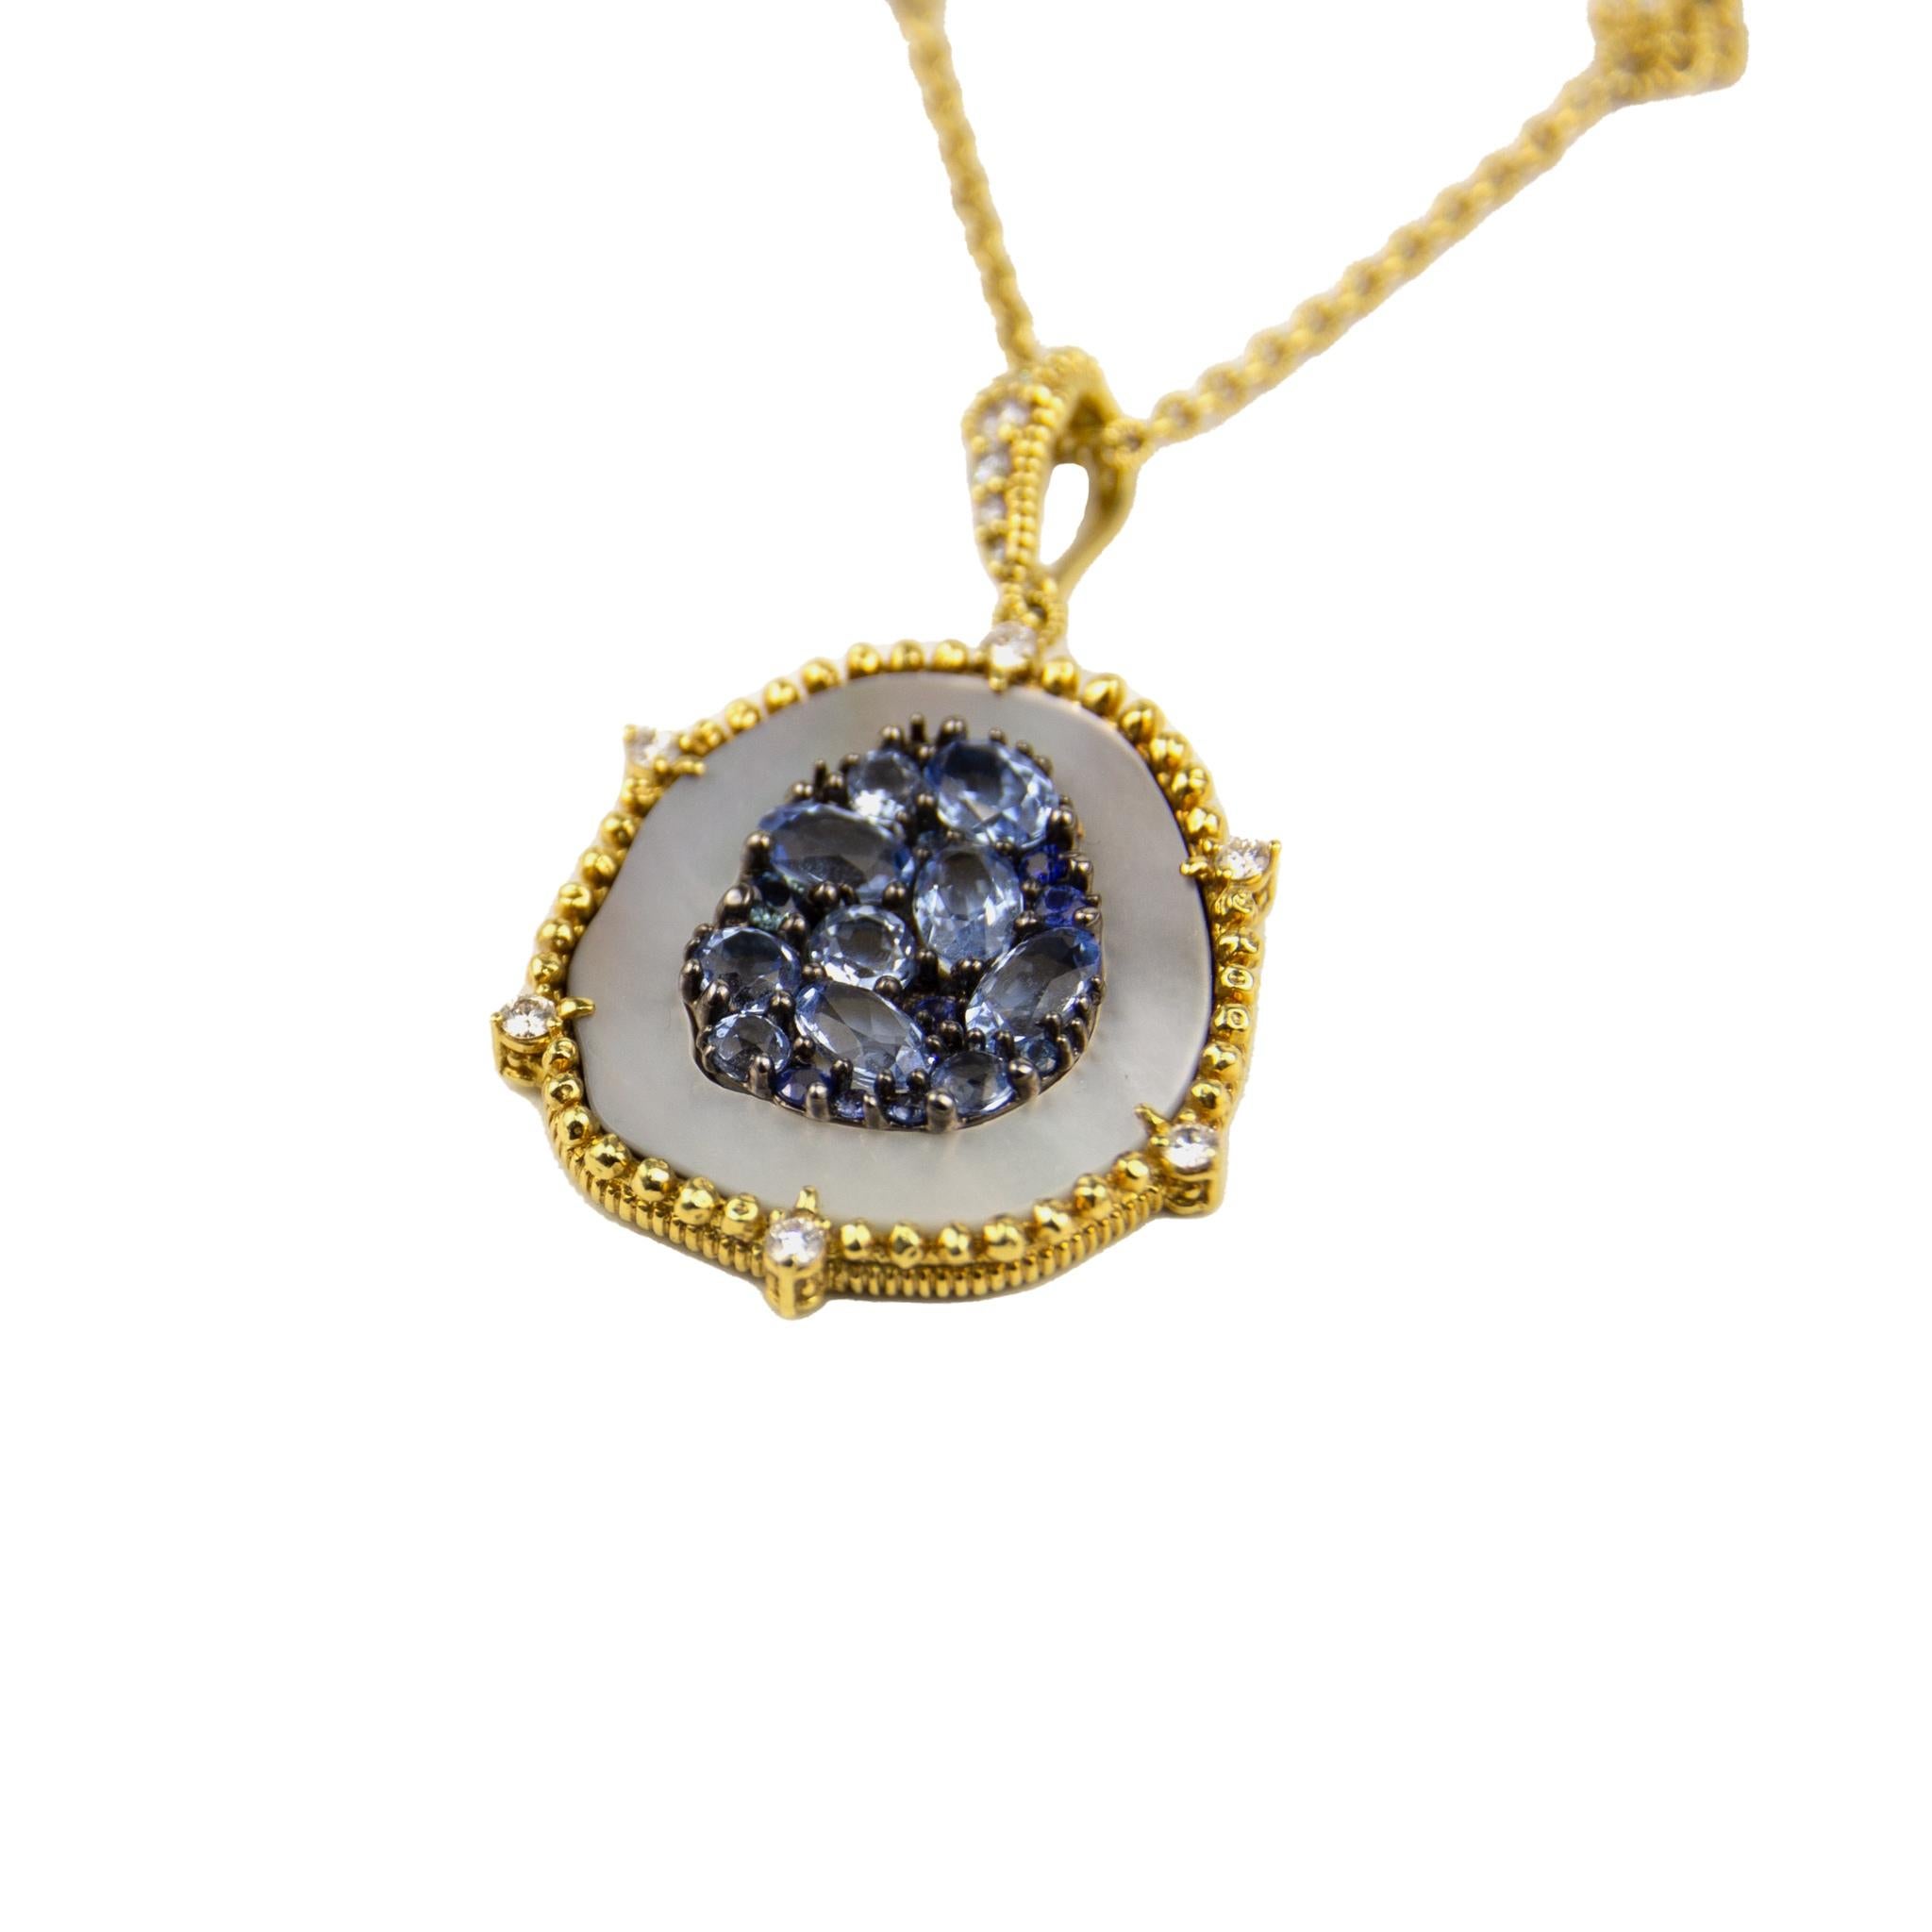 Judith Ripka 18K Pendant Necklace
Pendant material: Yellow Gold and Mother of Pearl
Quartz: 3.72ctw
Sapphire: 0.35ctw
SKU: JR01021
Retail price: 14,280.00